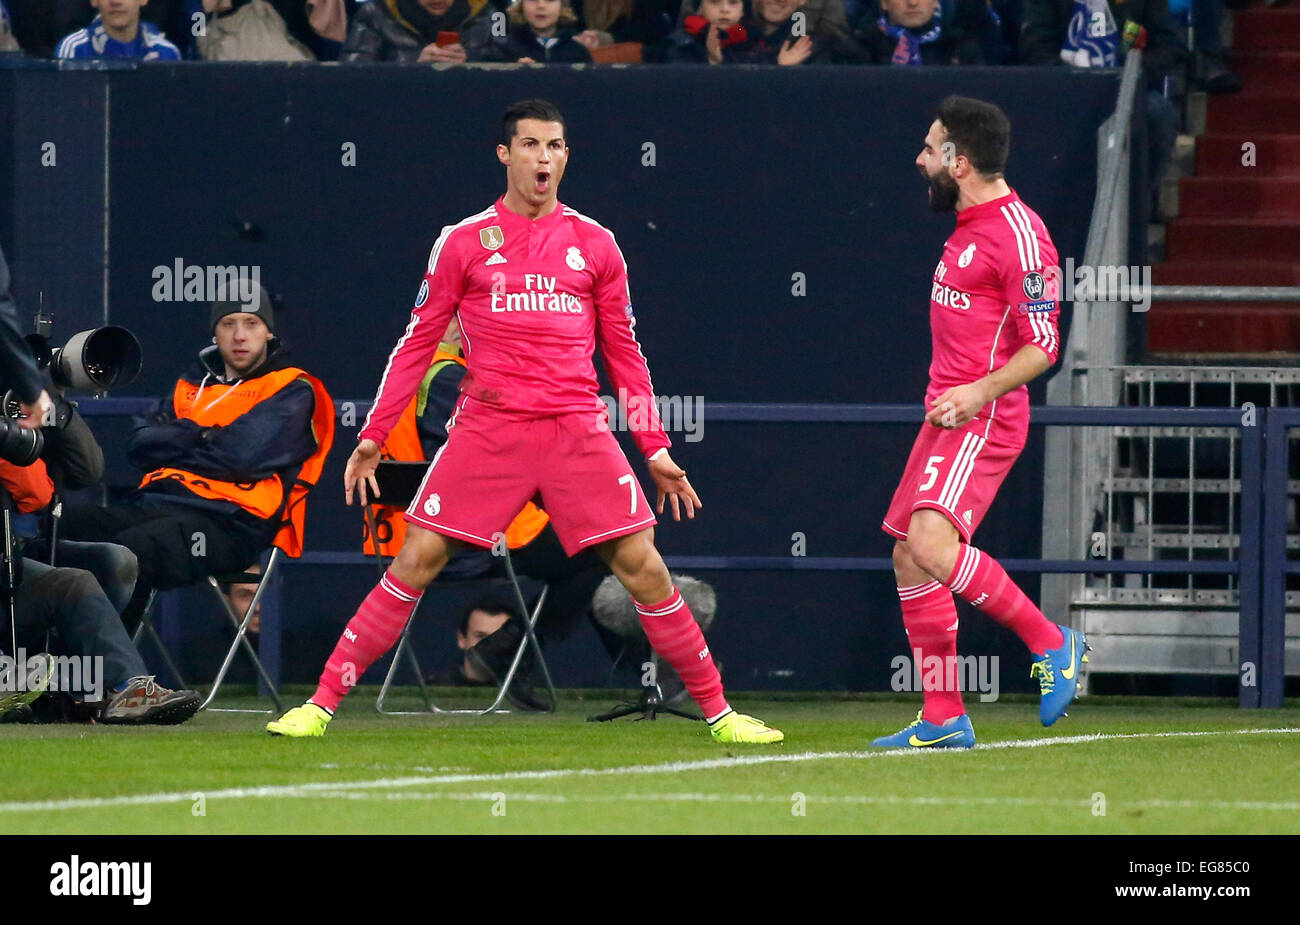 Gelsenkirchen, Germany. 18th Feb, 2015. Cristiano Ronaldo (Real Madrid) (L) celebrates scoring the 1:0 with Fabio Coentrao (Real Madrid) during the Champions League match between FC Schalke 04 and Real Madrid, Veltins Arena in Gelsenkirchen on February 18., 2015. Credit:  dpa picture alliance/Alamy Live News Stock Photo